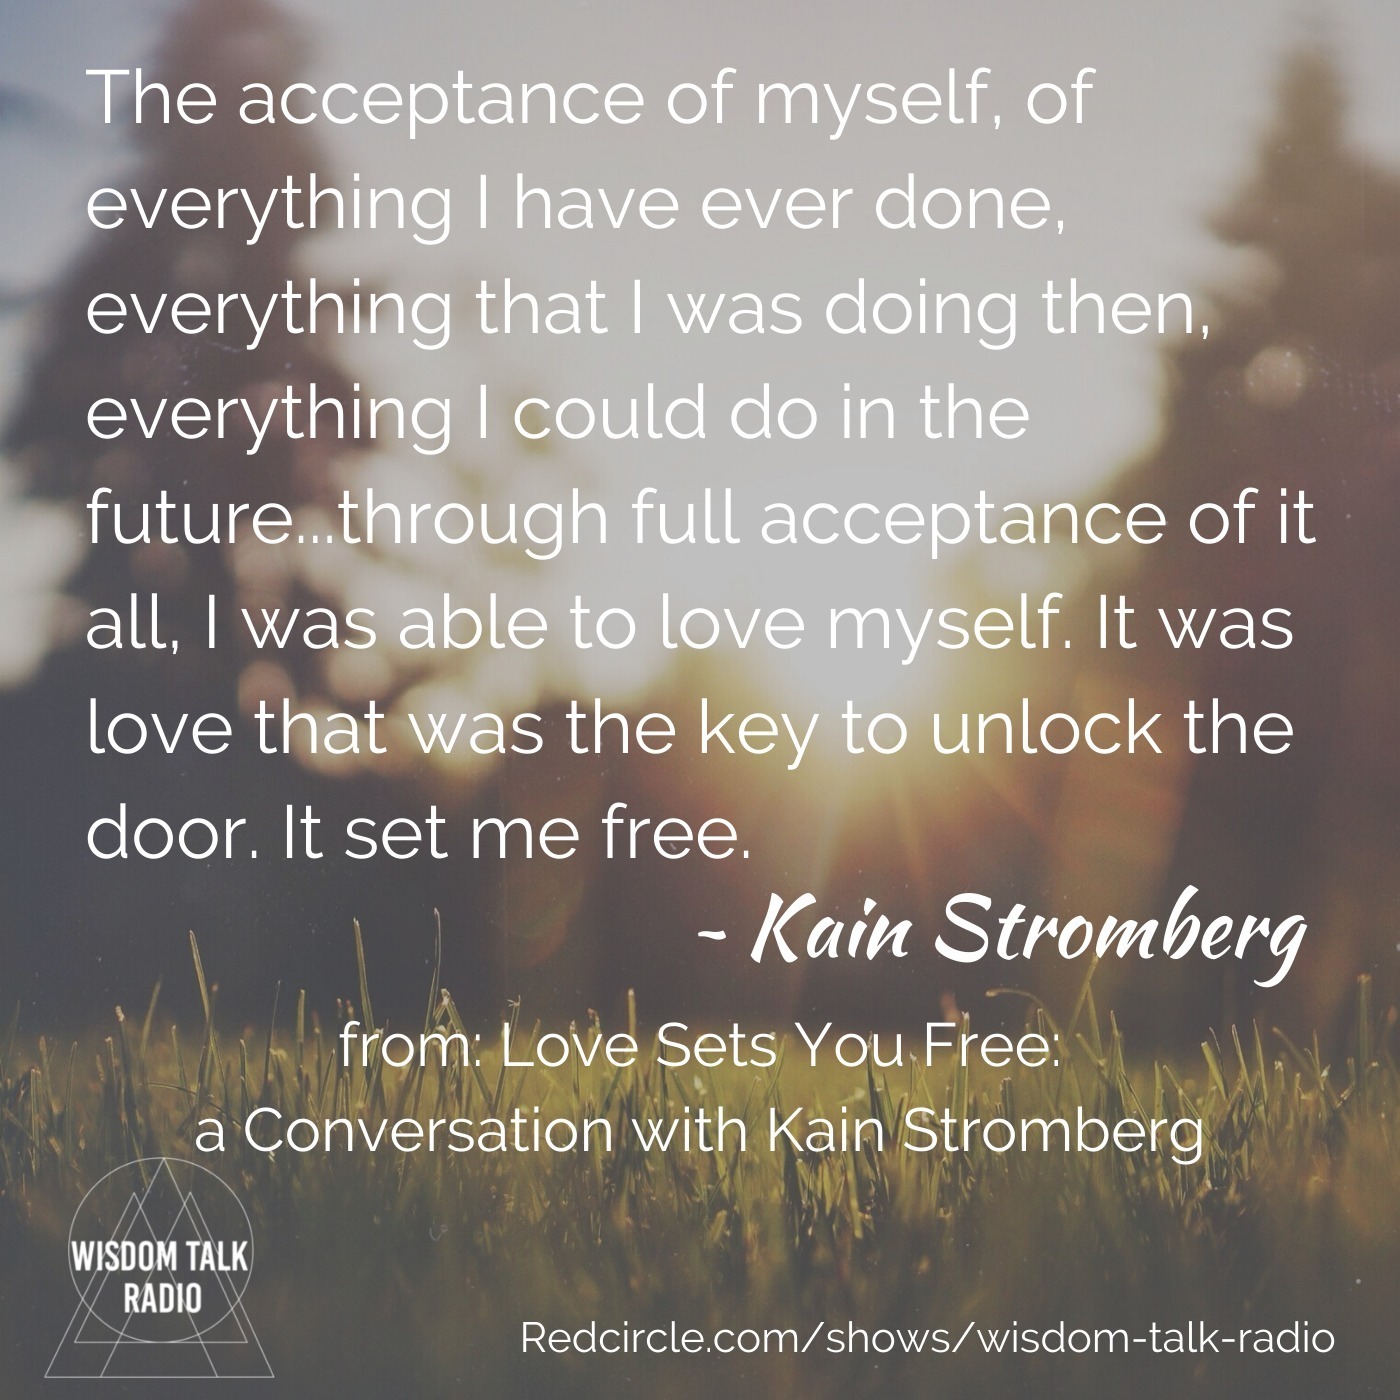 Love Sets You Free: a Conversation with Kain Stromberg